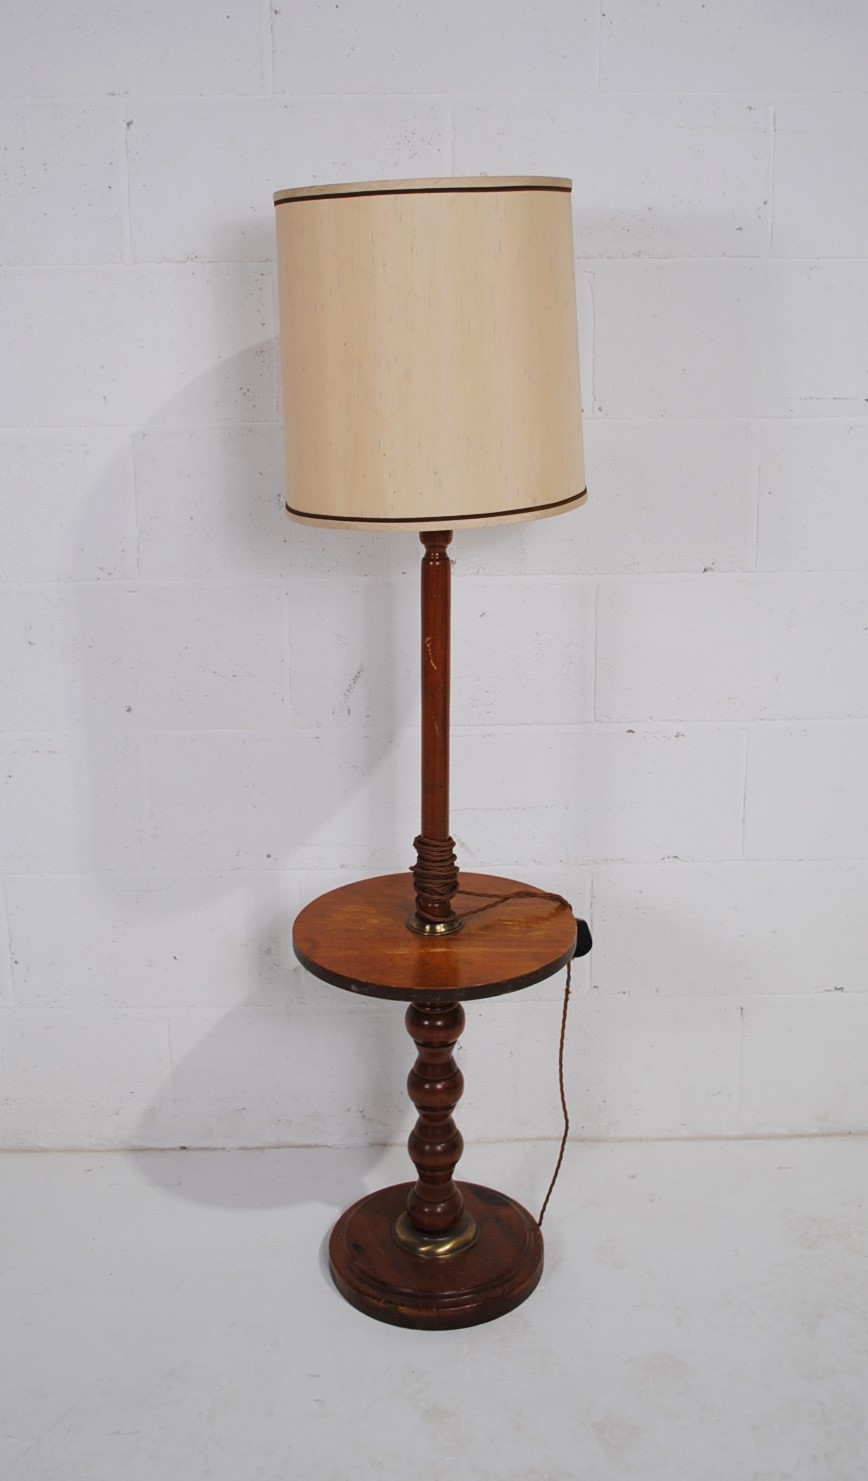 A wooden standard lamp with table base